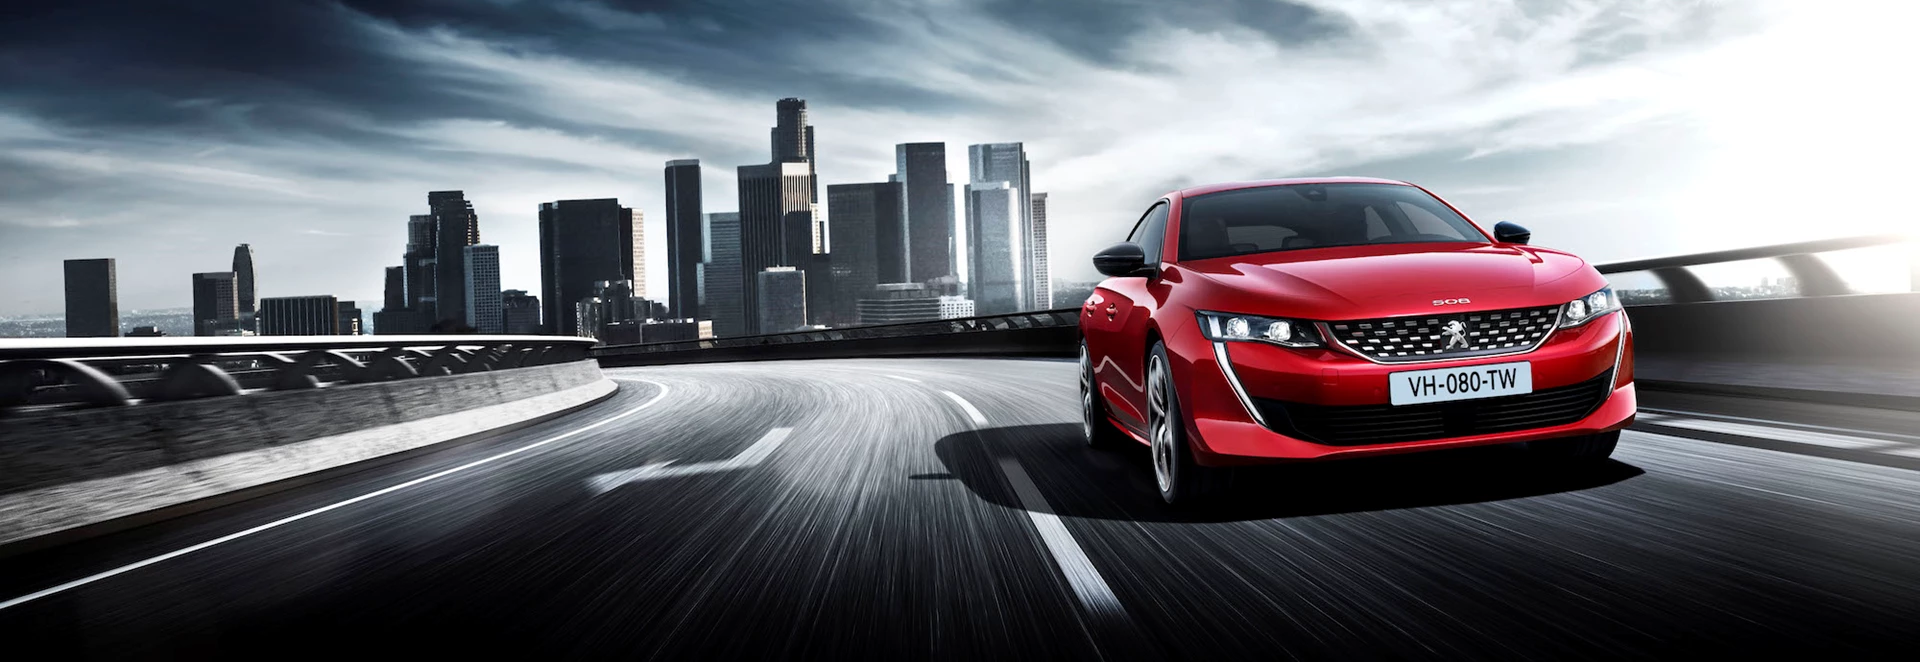 Peugeot unveils the all new 508 ‘fastback’